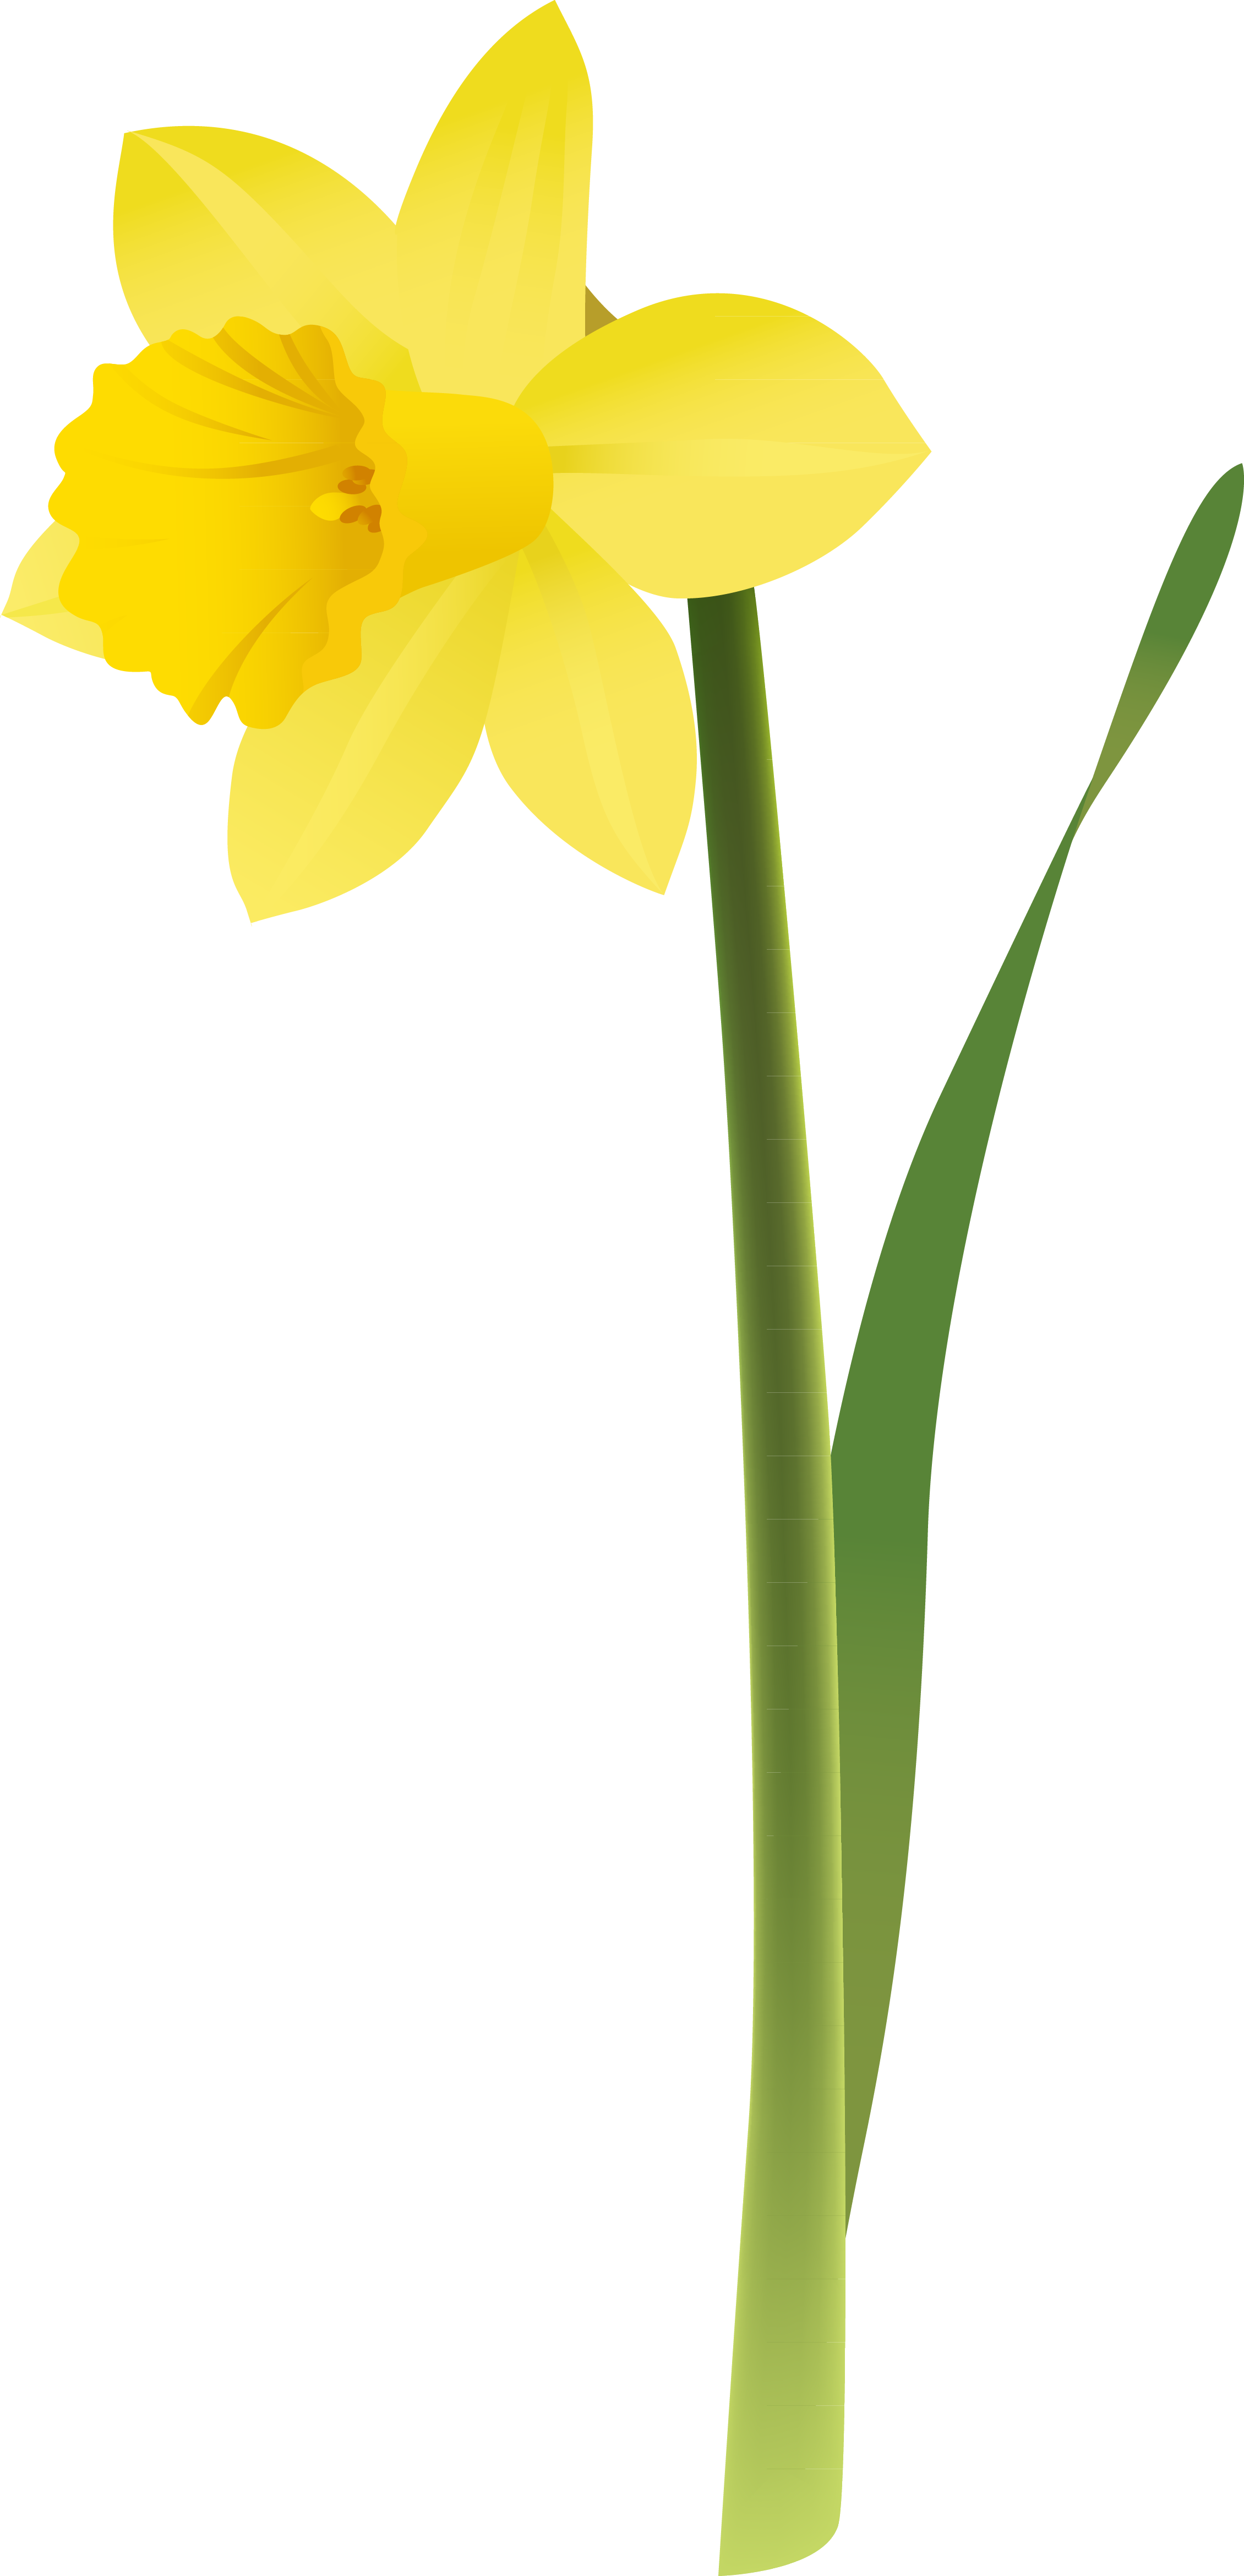 Yellow Narcissus Flower Illustration PNG image